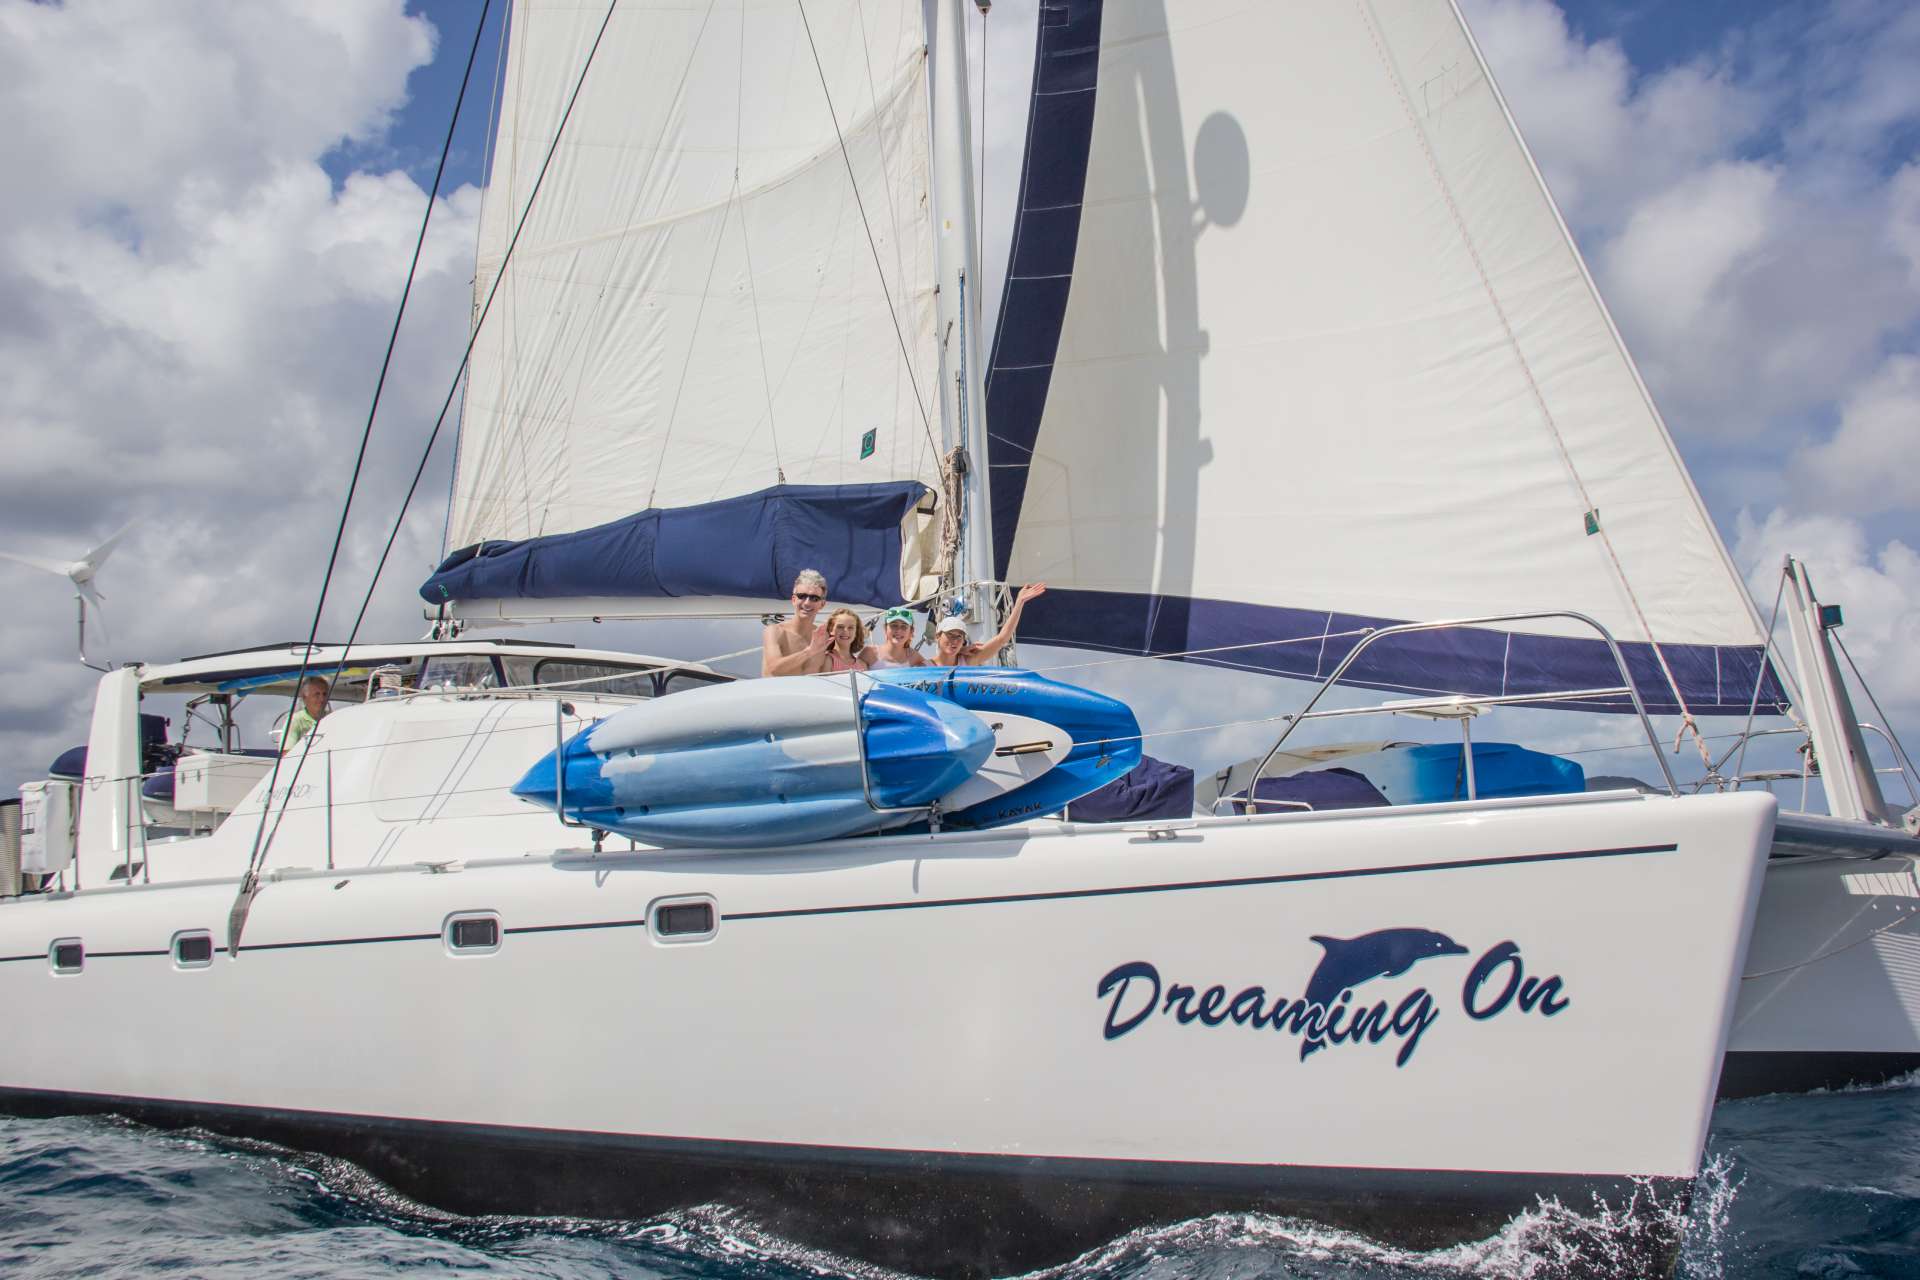 dreaming on - Yacht Charter Birmingham & Boat hire in Central america, Belize 2